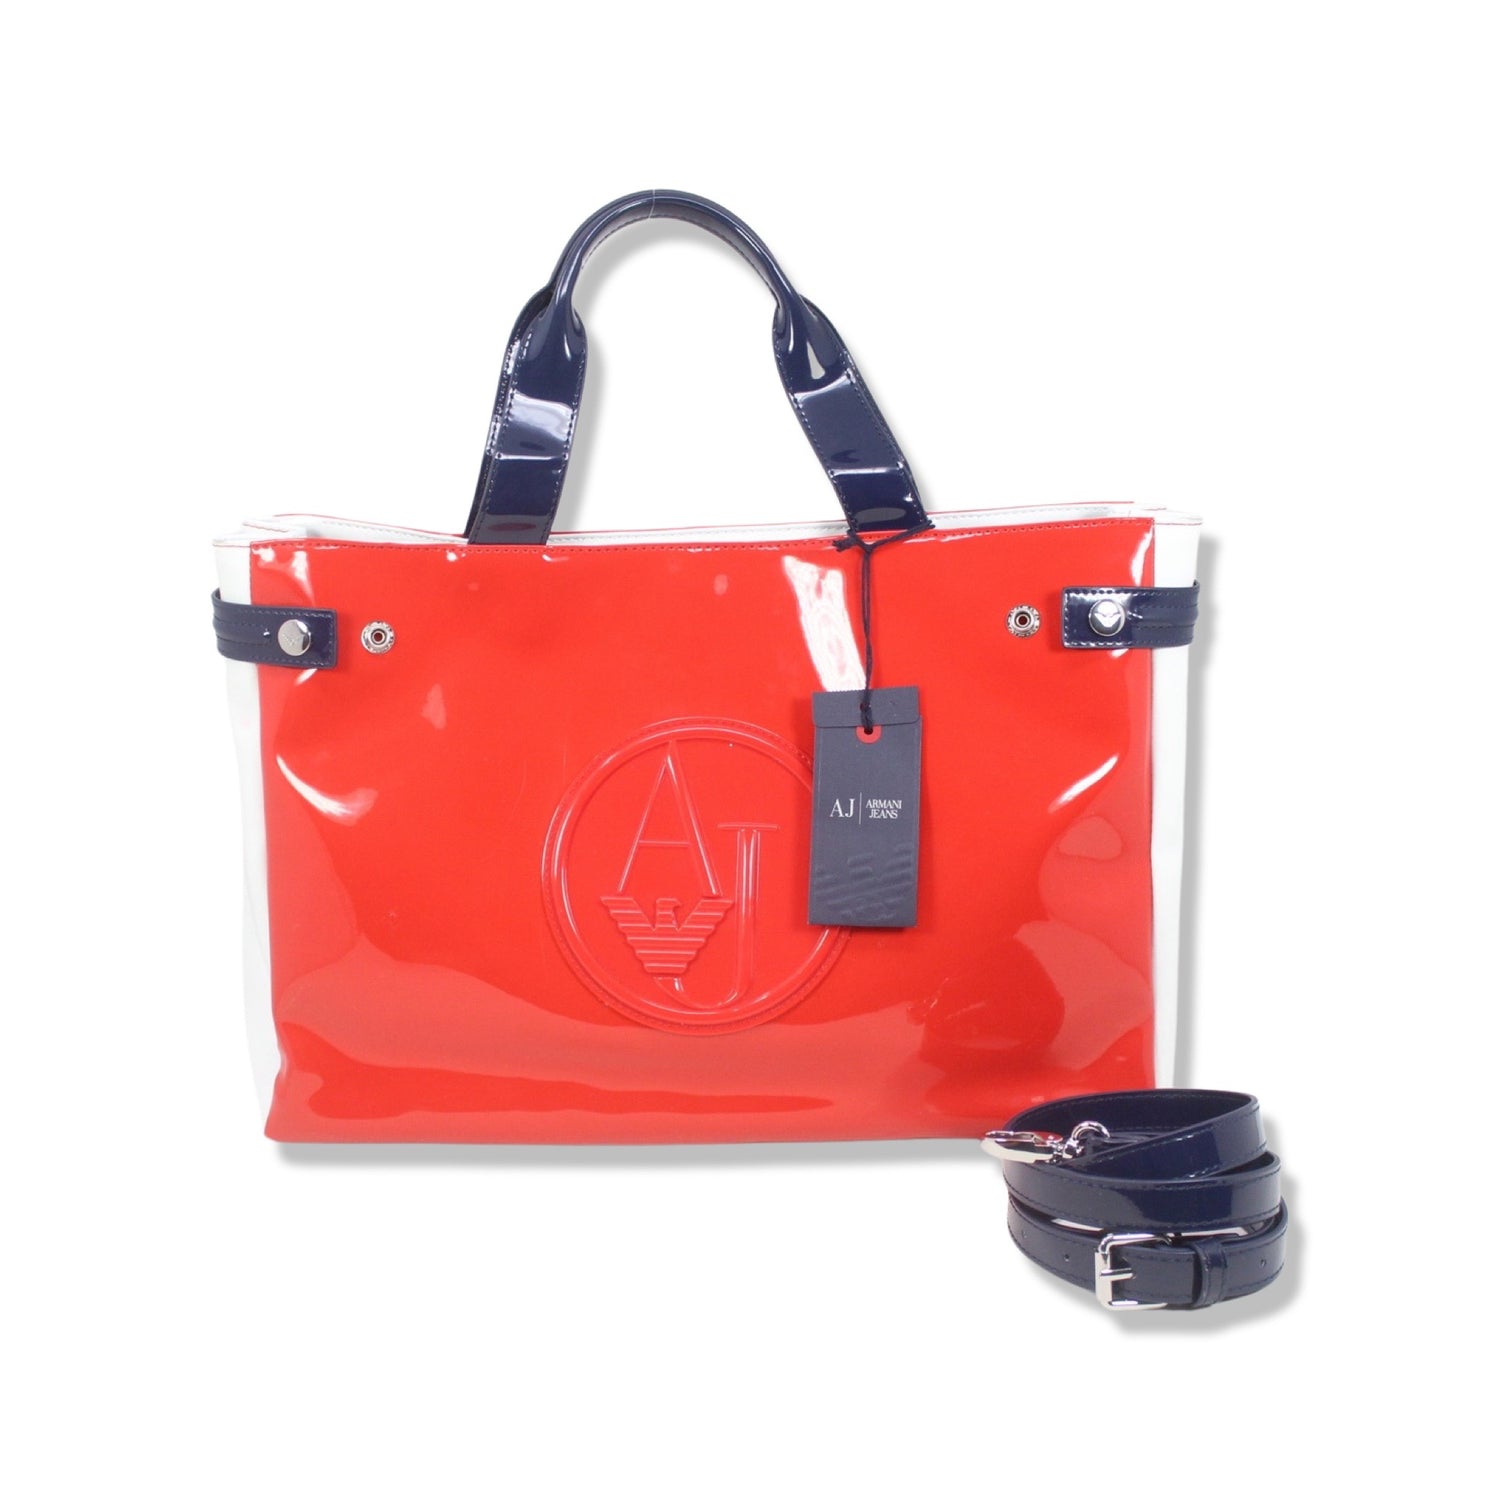 Patent leather handbag Armani Jeans Red in Patent leather - 37358819